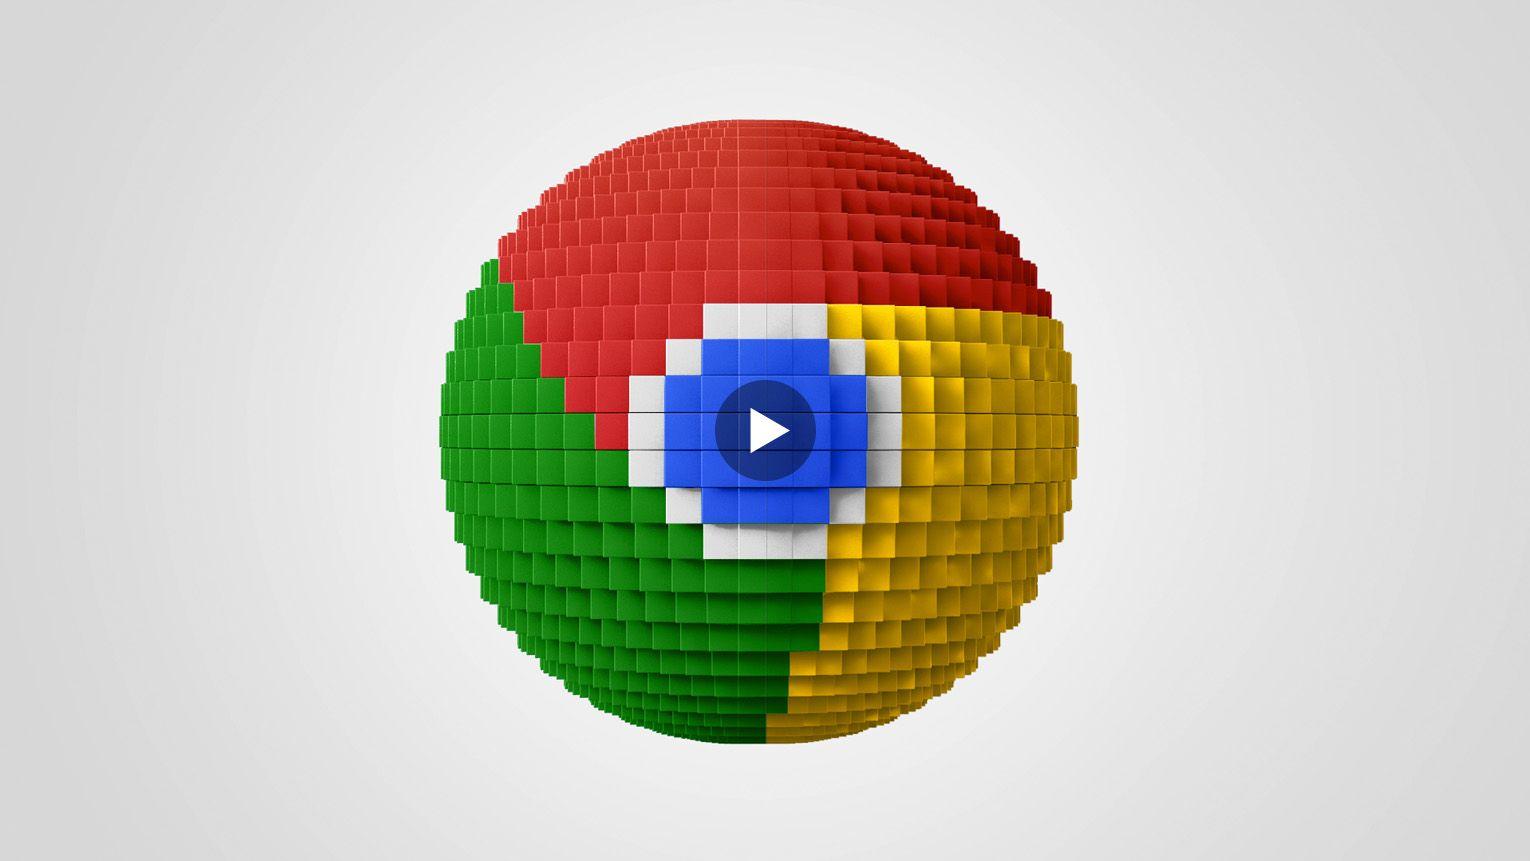 Chrome Browser Logo - Annoying Chrome Issues & How to Fix Them